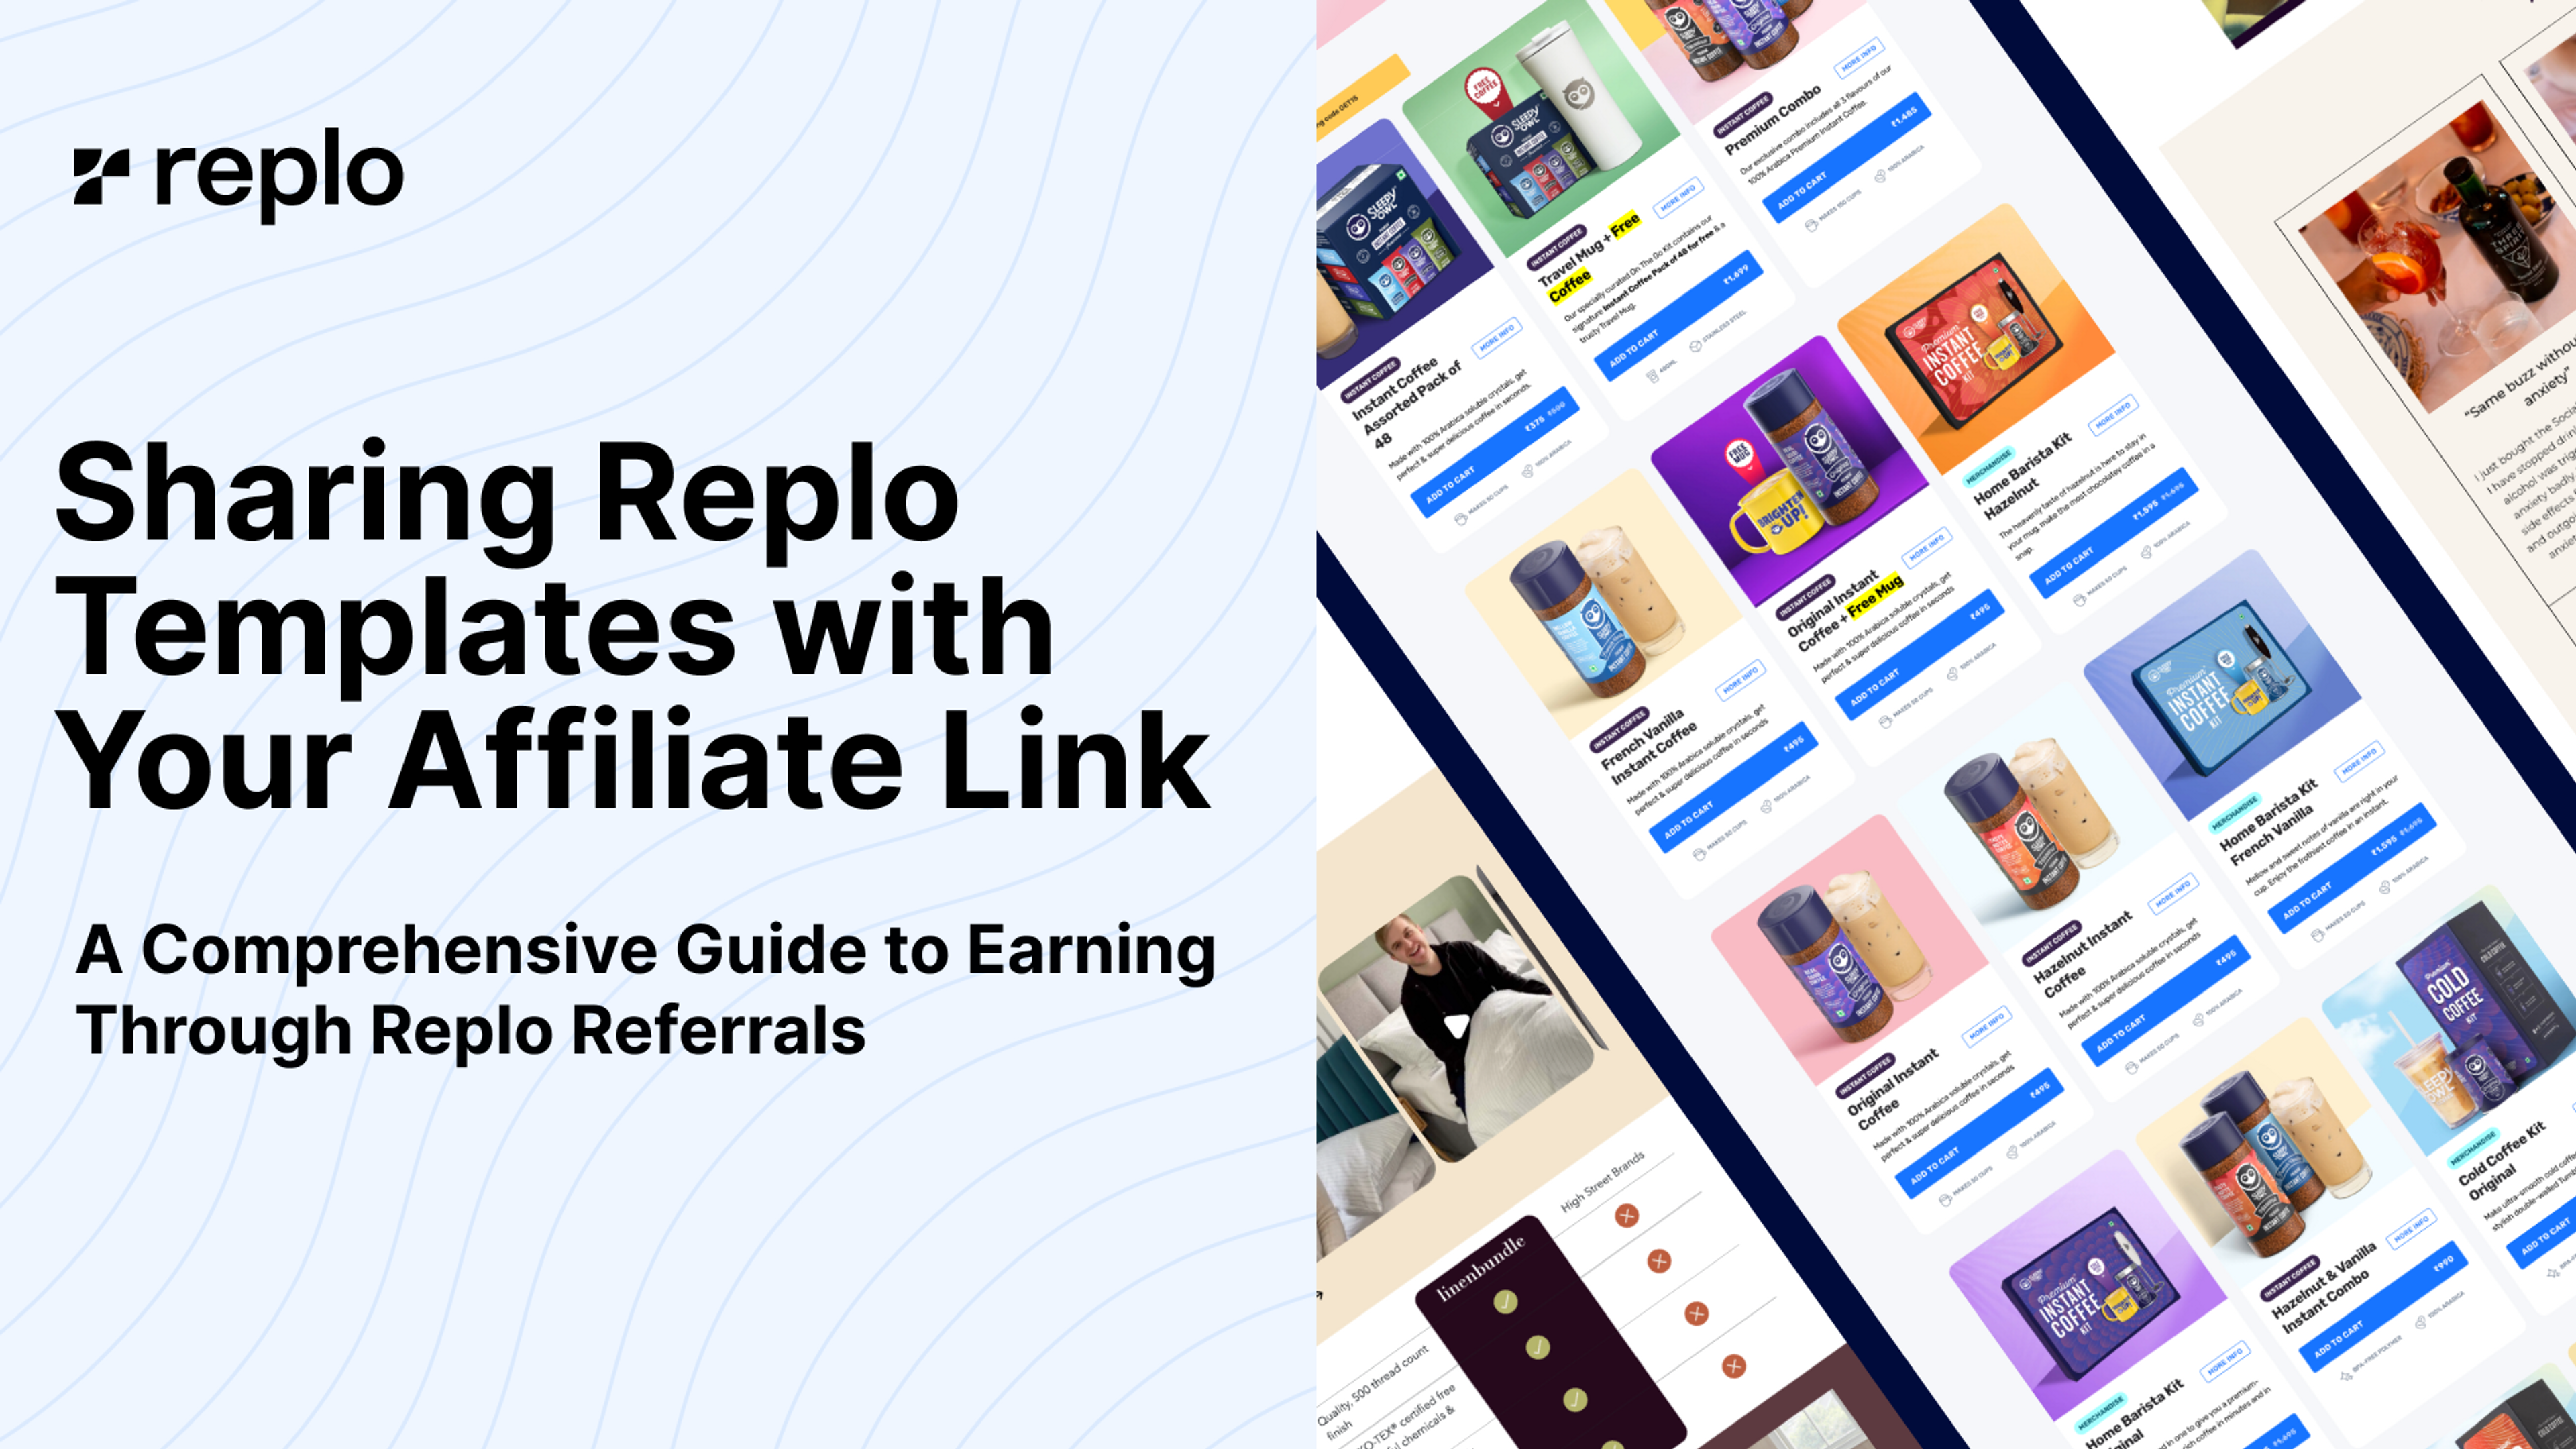 Sharing Replo Templates: A Comprehensive Guide to Earning Through Referrals